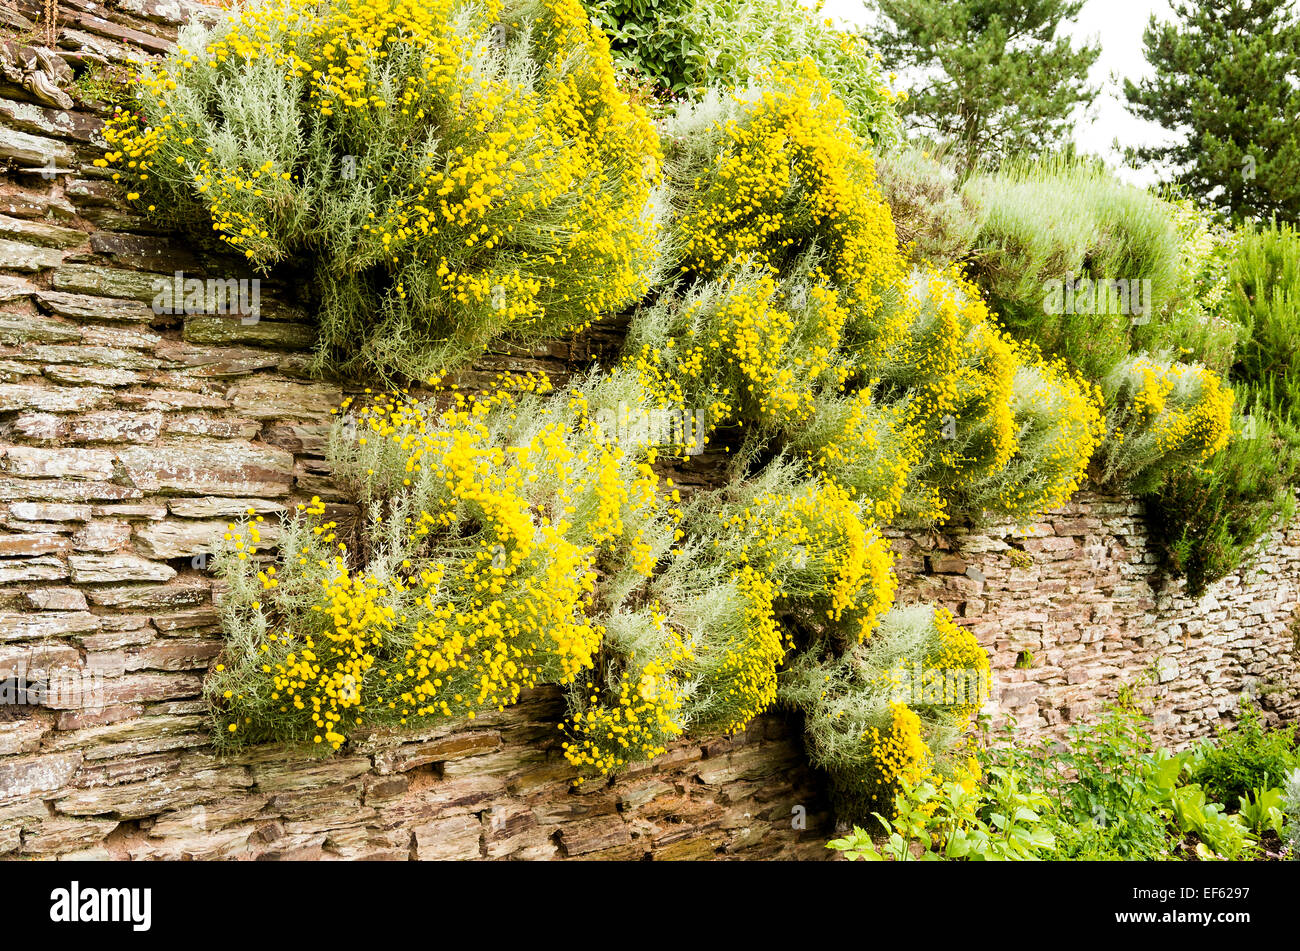 Yellow flowered santolina growing in wall crevices at Hestercombe UK Stock Photo